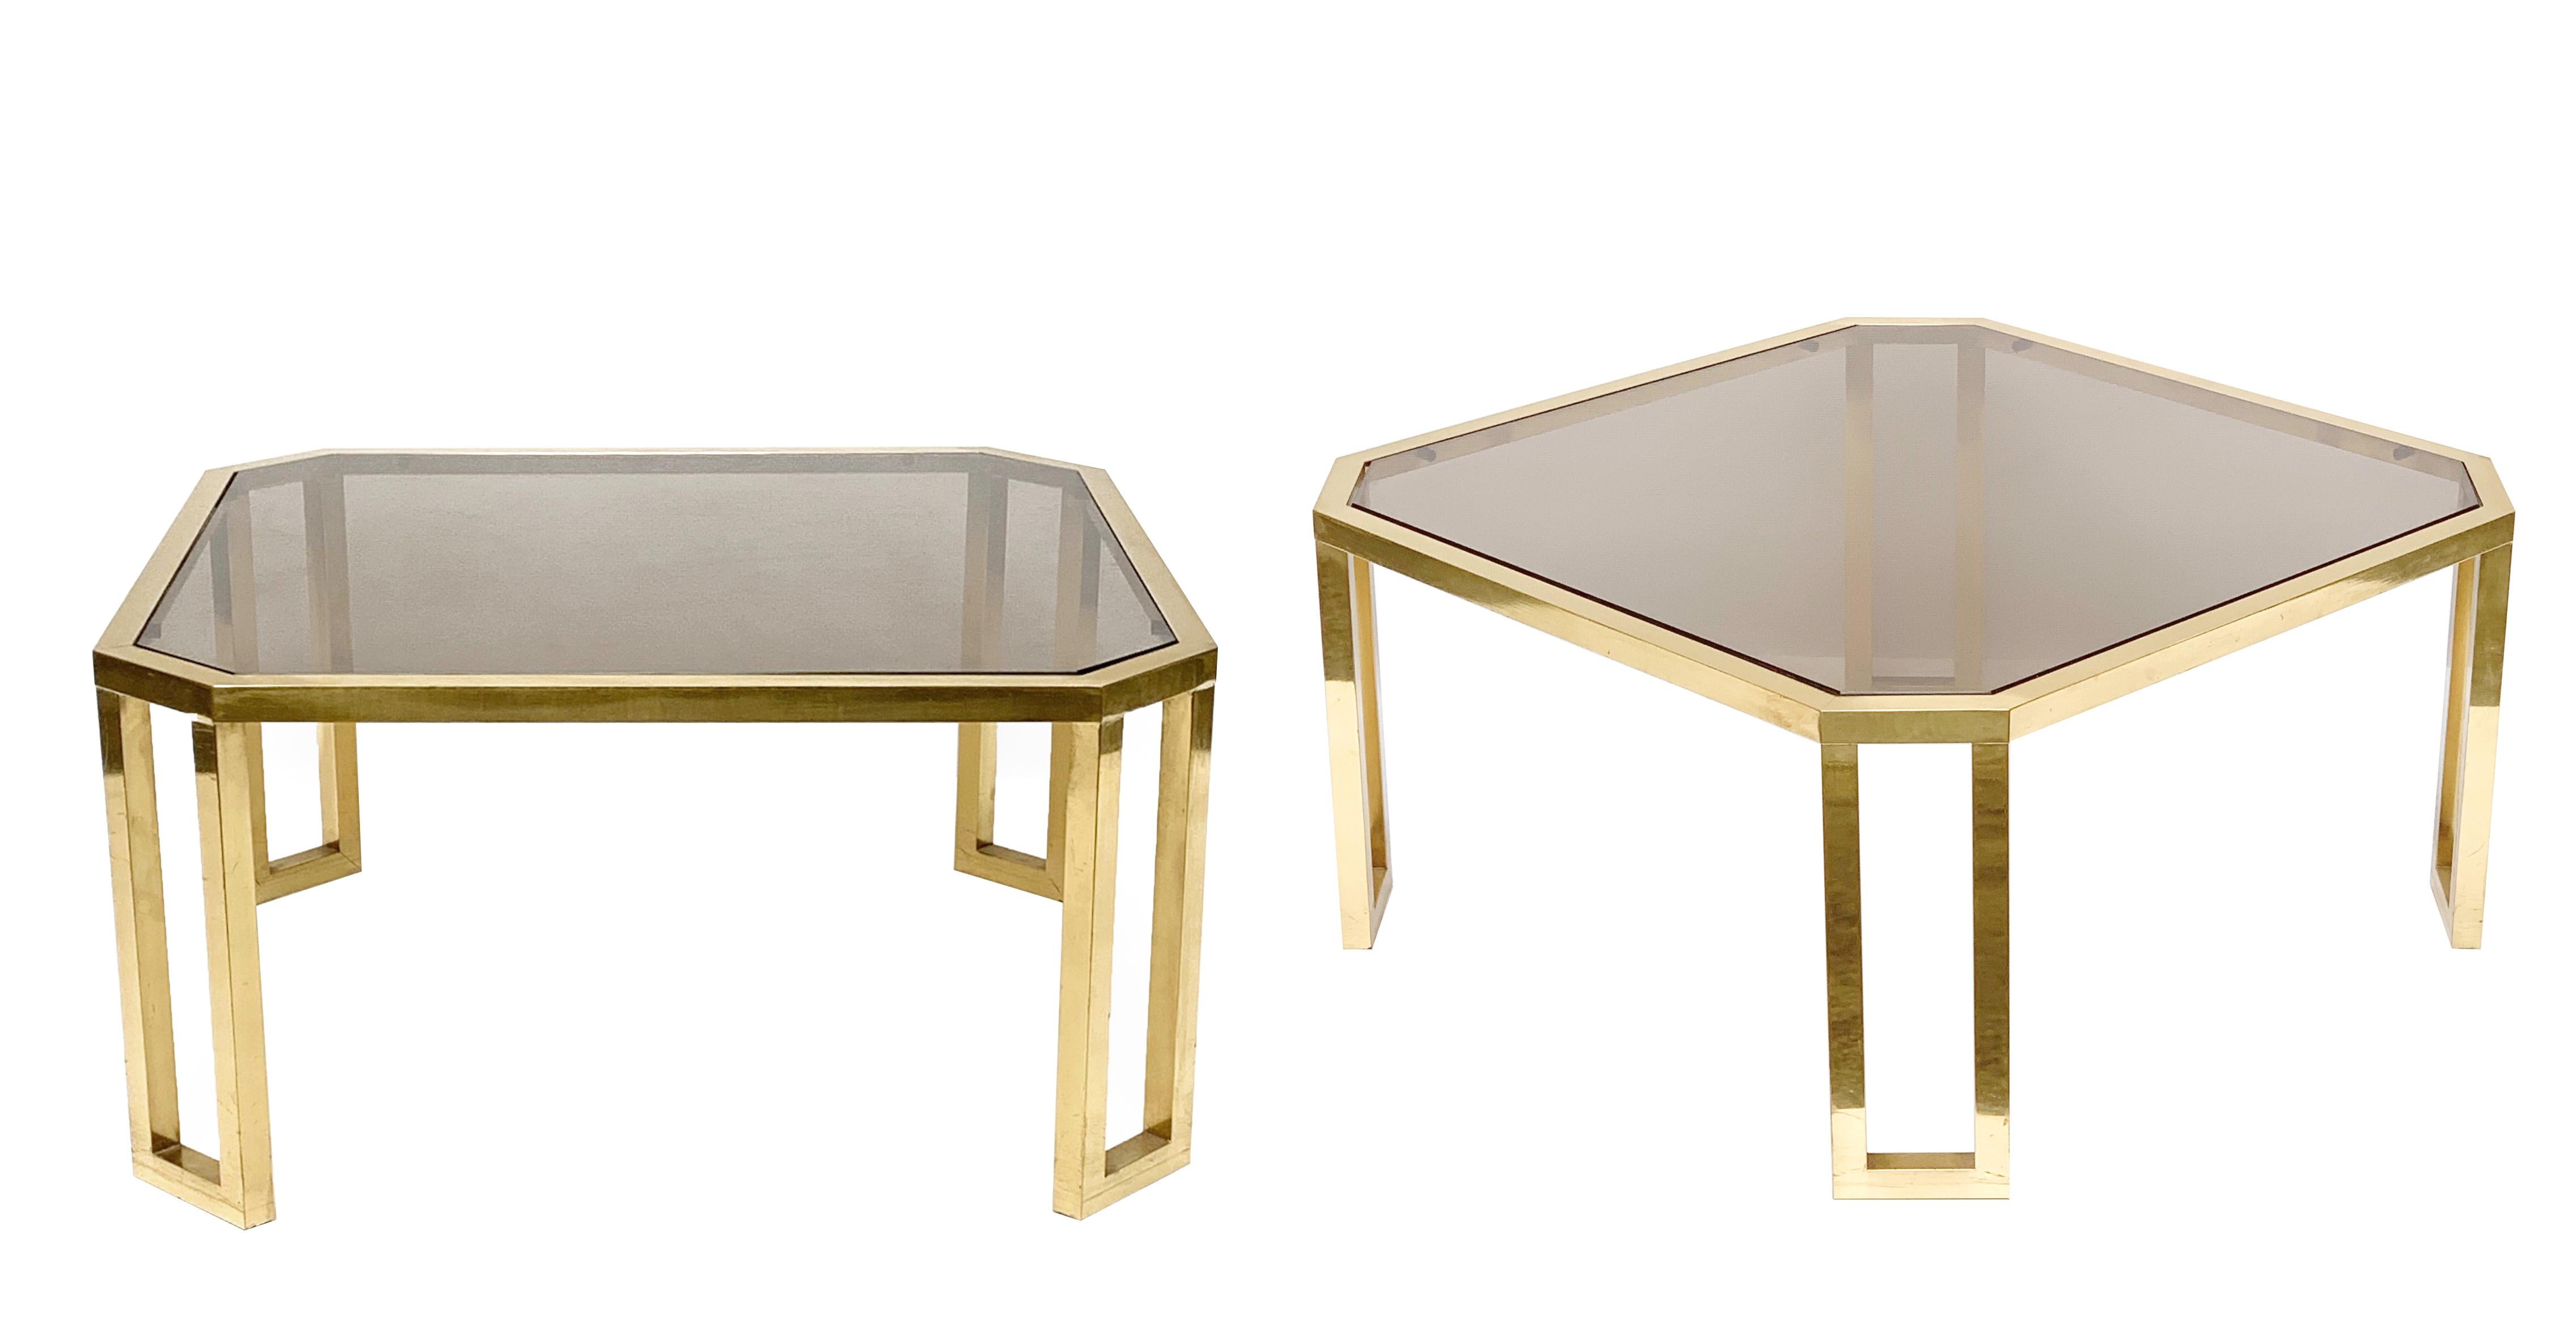 Octagonal coffee table in brass and smoked glass by Maison Jansen.
Can be used as a side table or as a coffee table. France, 1970s

Two pieces available, the price refers to the single table.